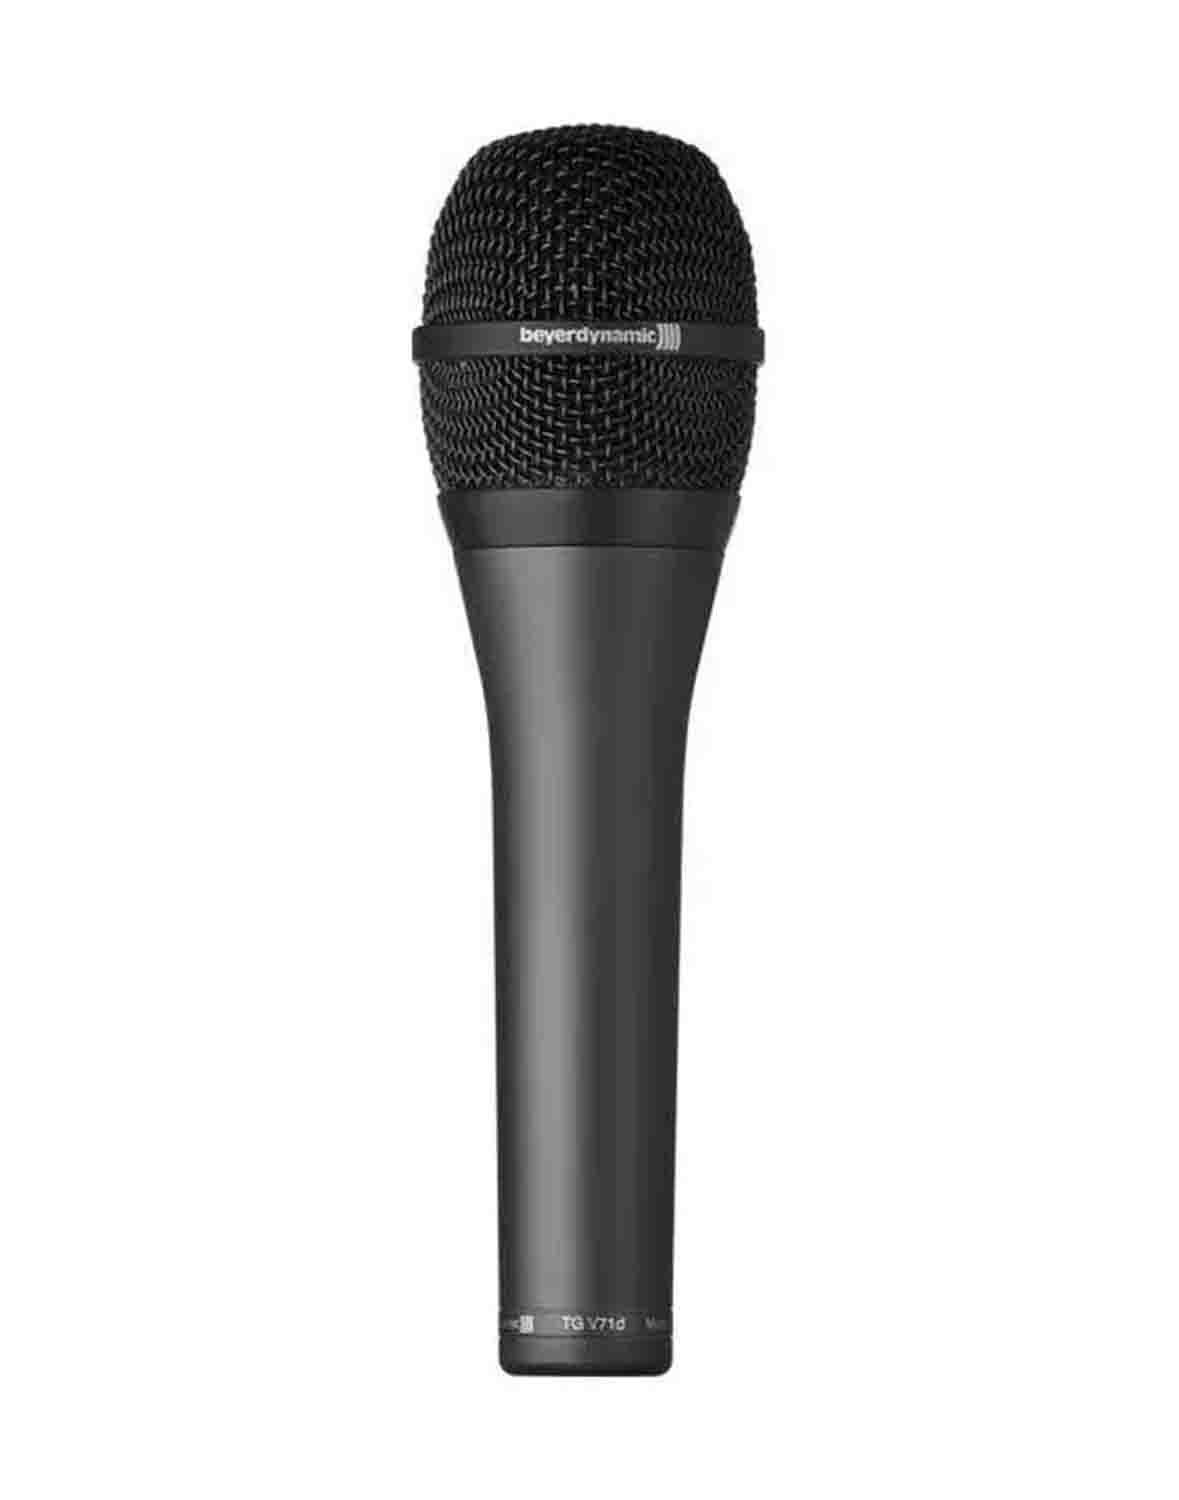 Beyerdynamic TG V71D Hypercardiod Dynamic Vocal Microphone with Compensated Proximity Effect - Hollywood DJ